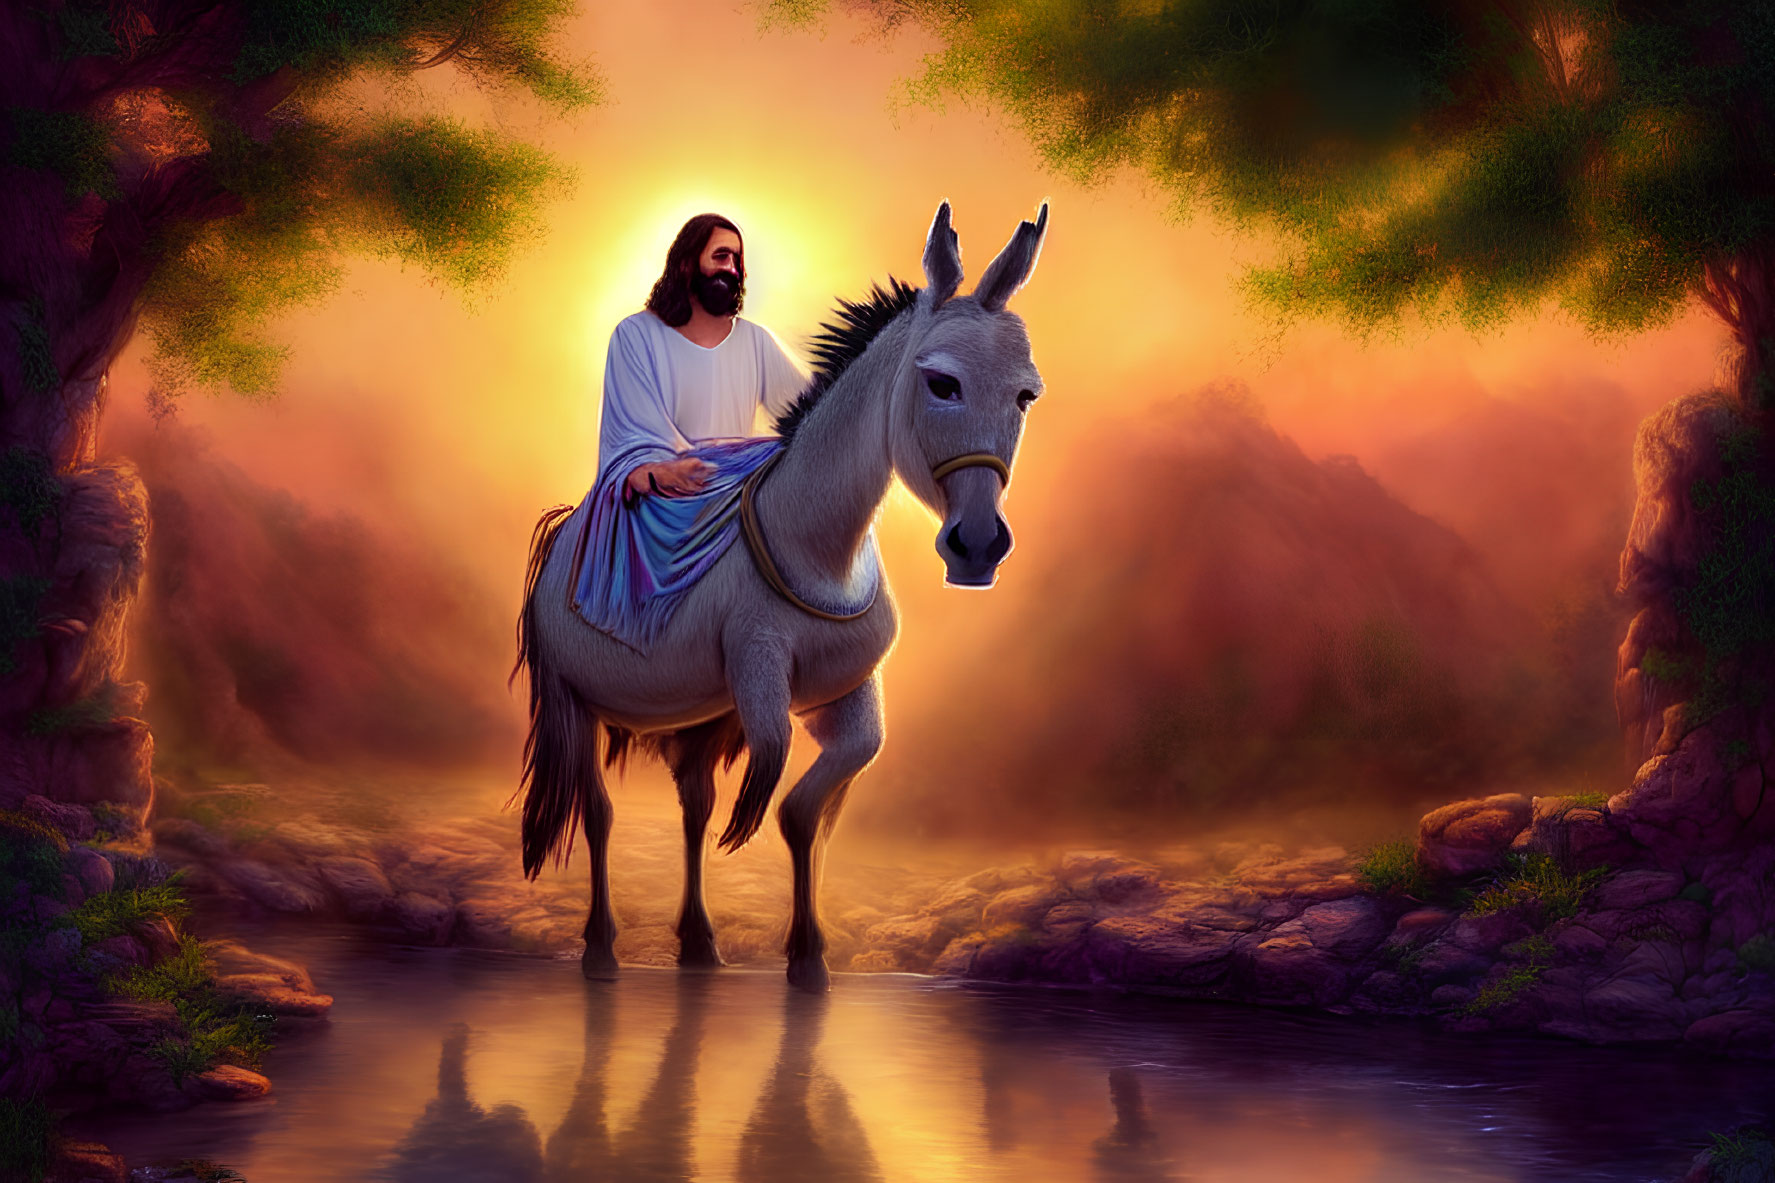 Man with Beard Riding Donkey in Sunset Landscape